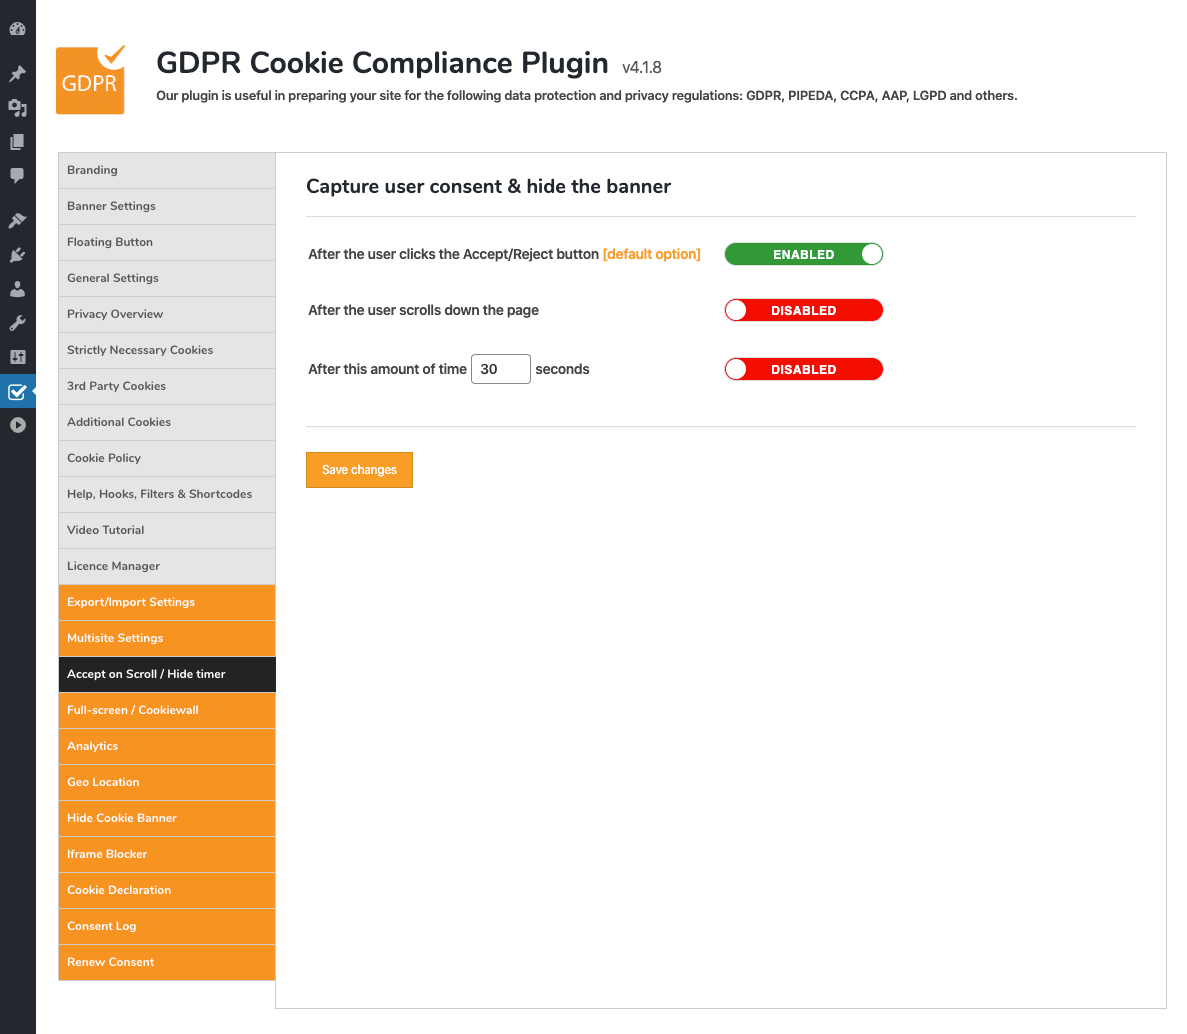 GDPR Cookie Compliance - Admin - Cookie Policy